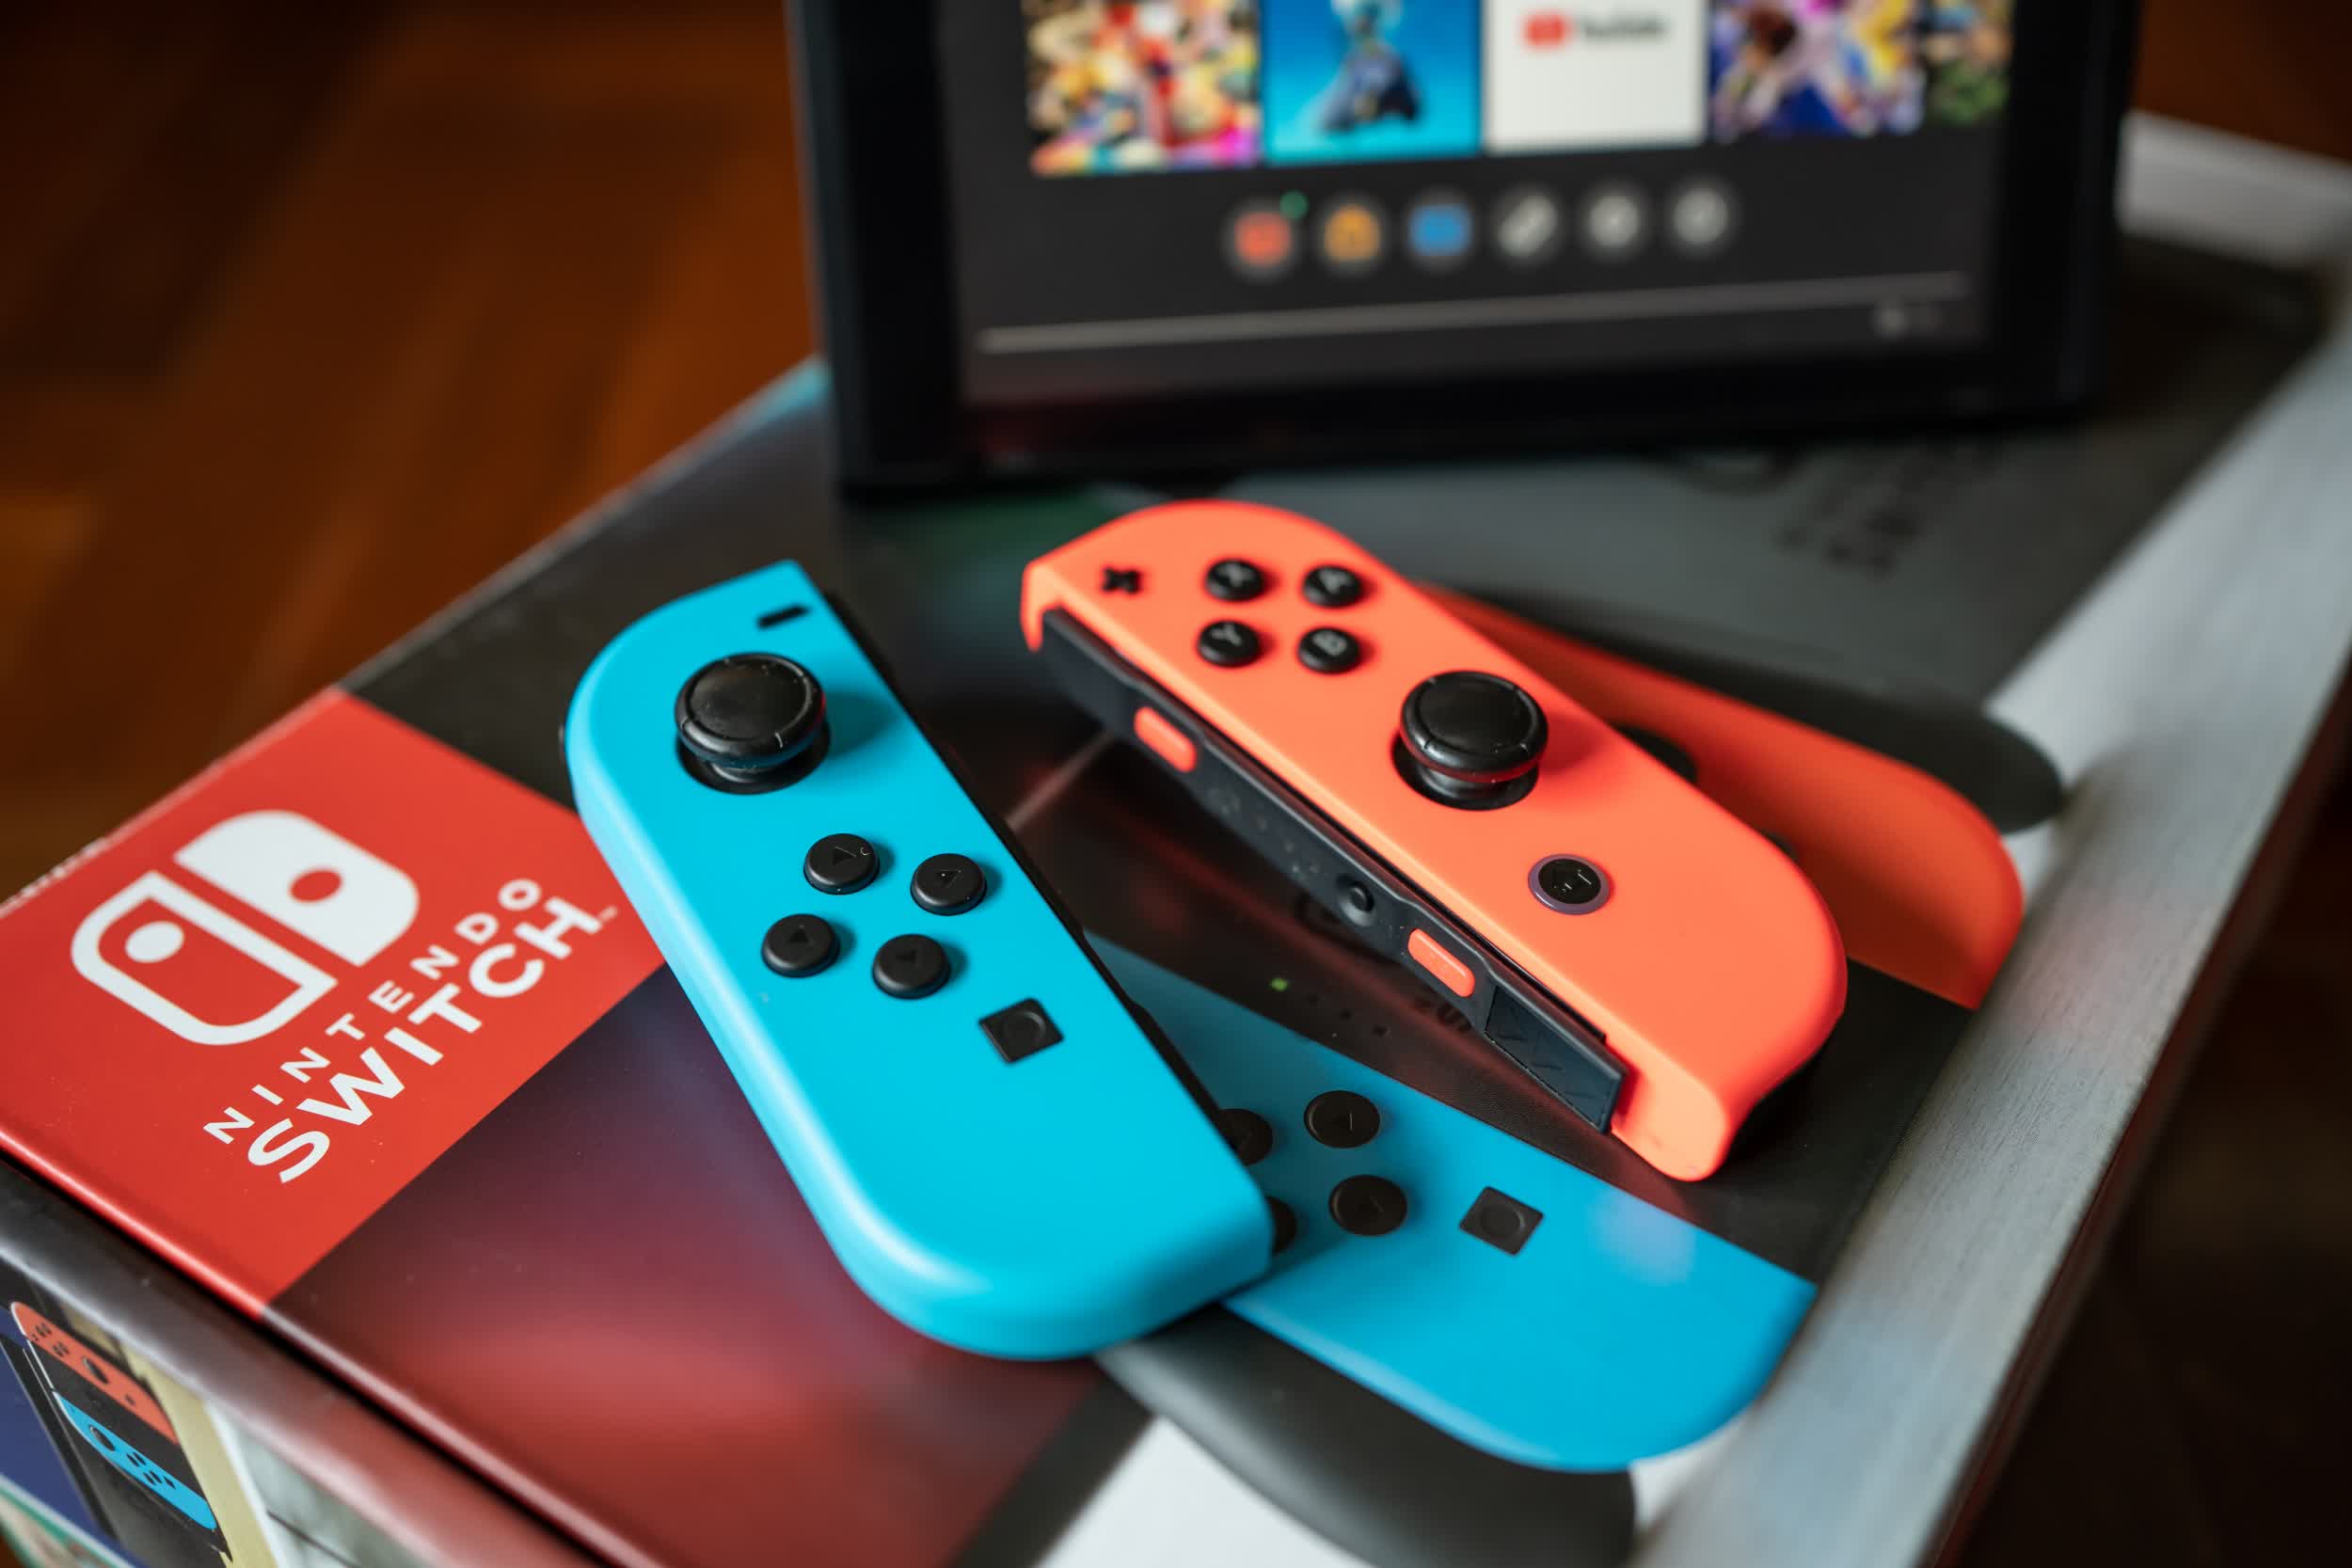 YouTuber offers a simple fix for Nintendo's Joy-Con drift issue